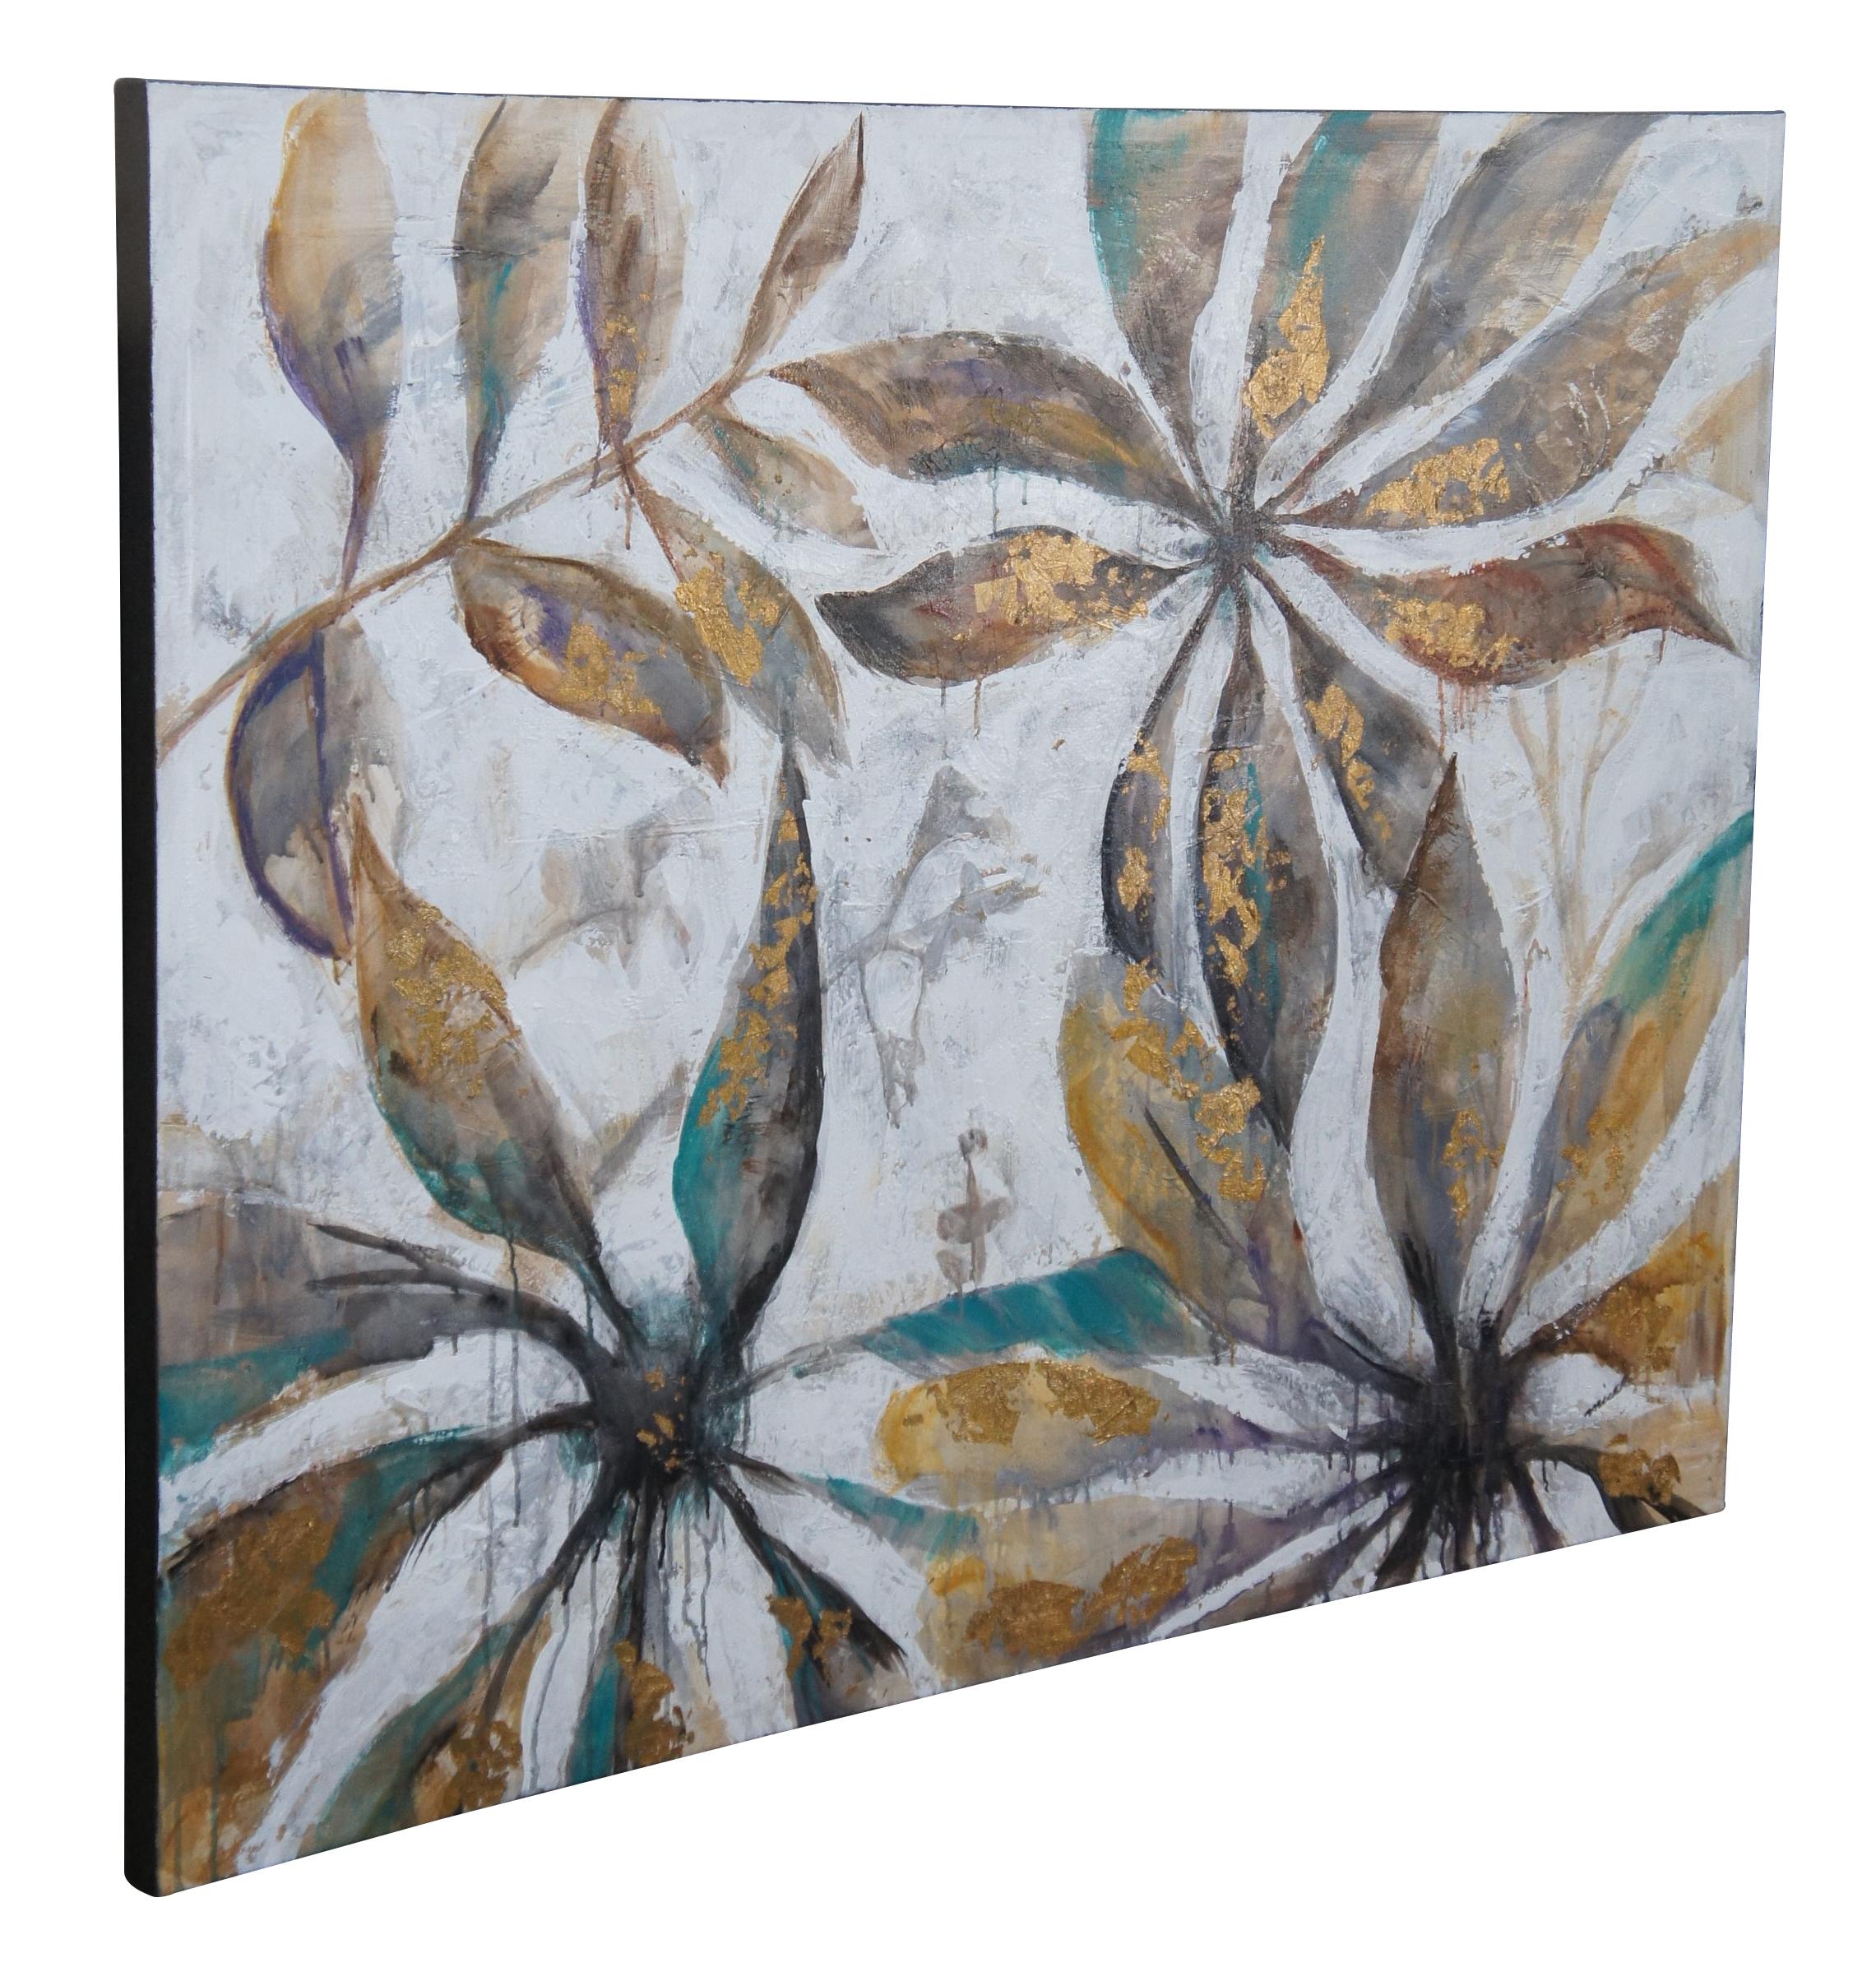 Vintage mixed media botanical painting on canvas featuring leaves and flowers with gilded gold foil accents. Signed lower right. Purchased from a gallery in Boca Raton Fl. 50